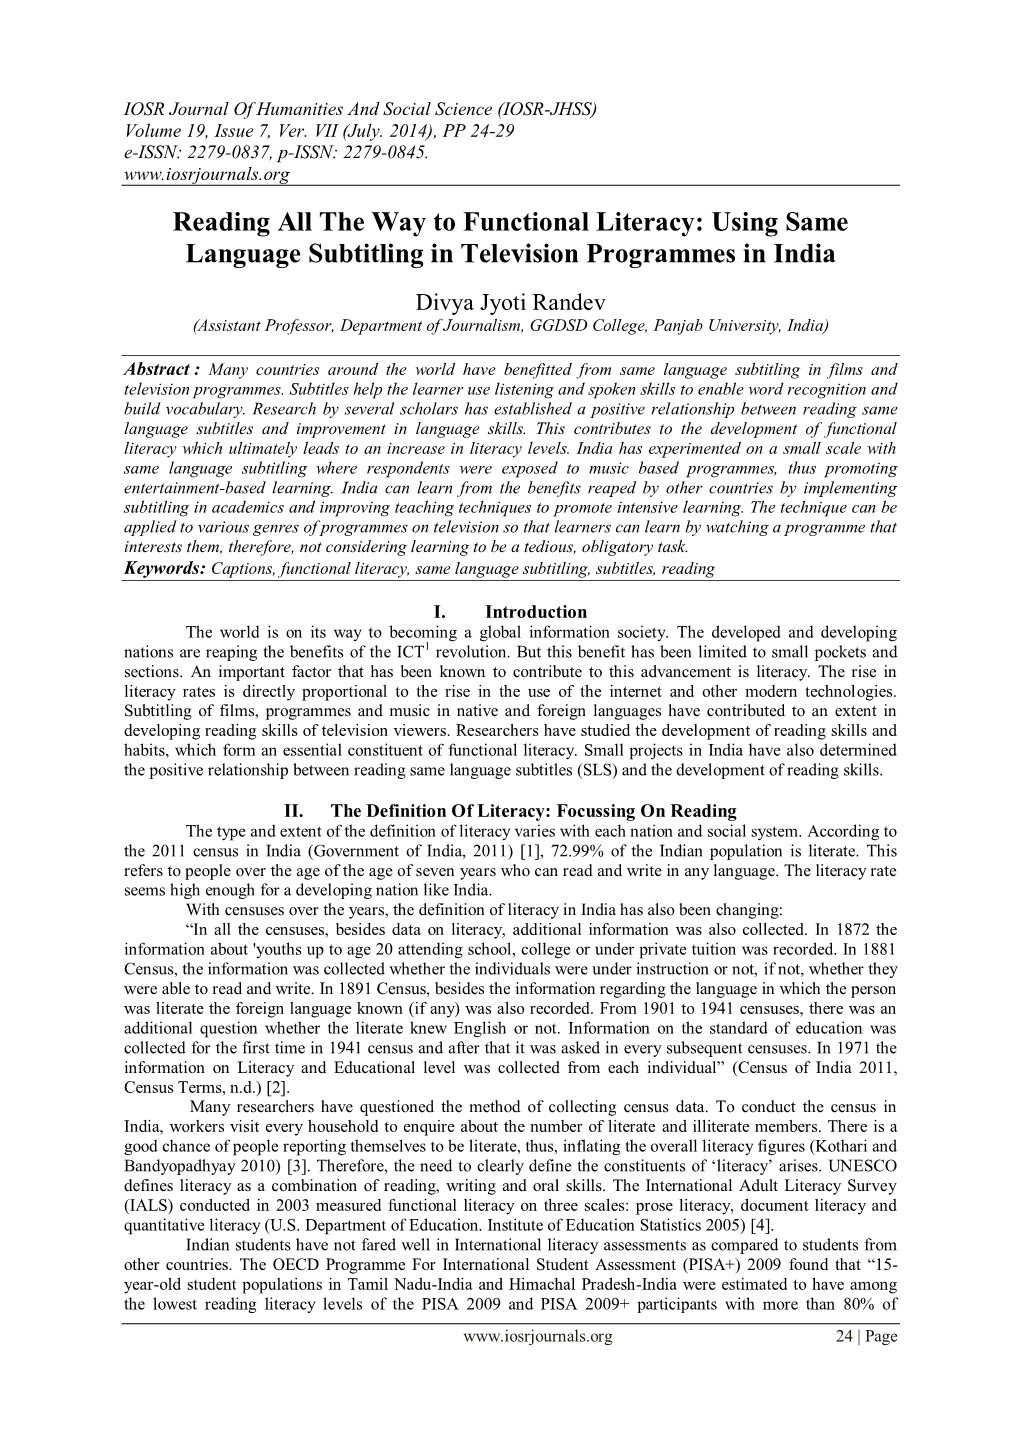 Reading All the Way to Functional Literacy: Using Same Language Subtitling in Television Programmes in India